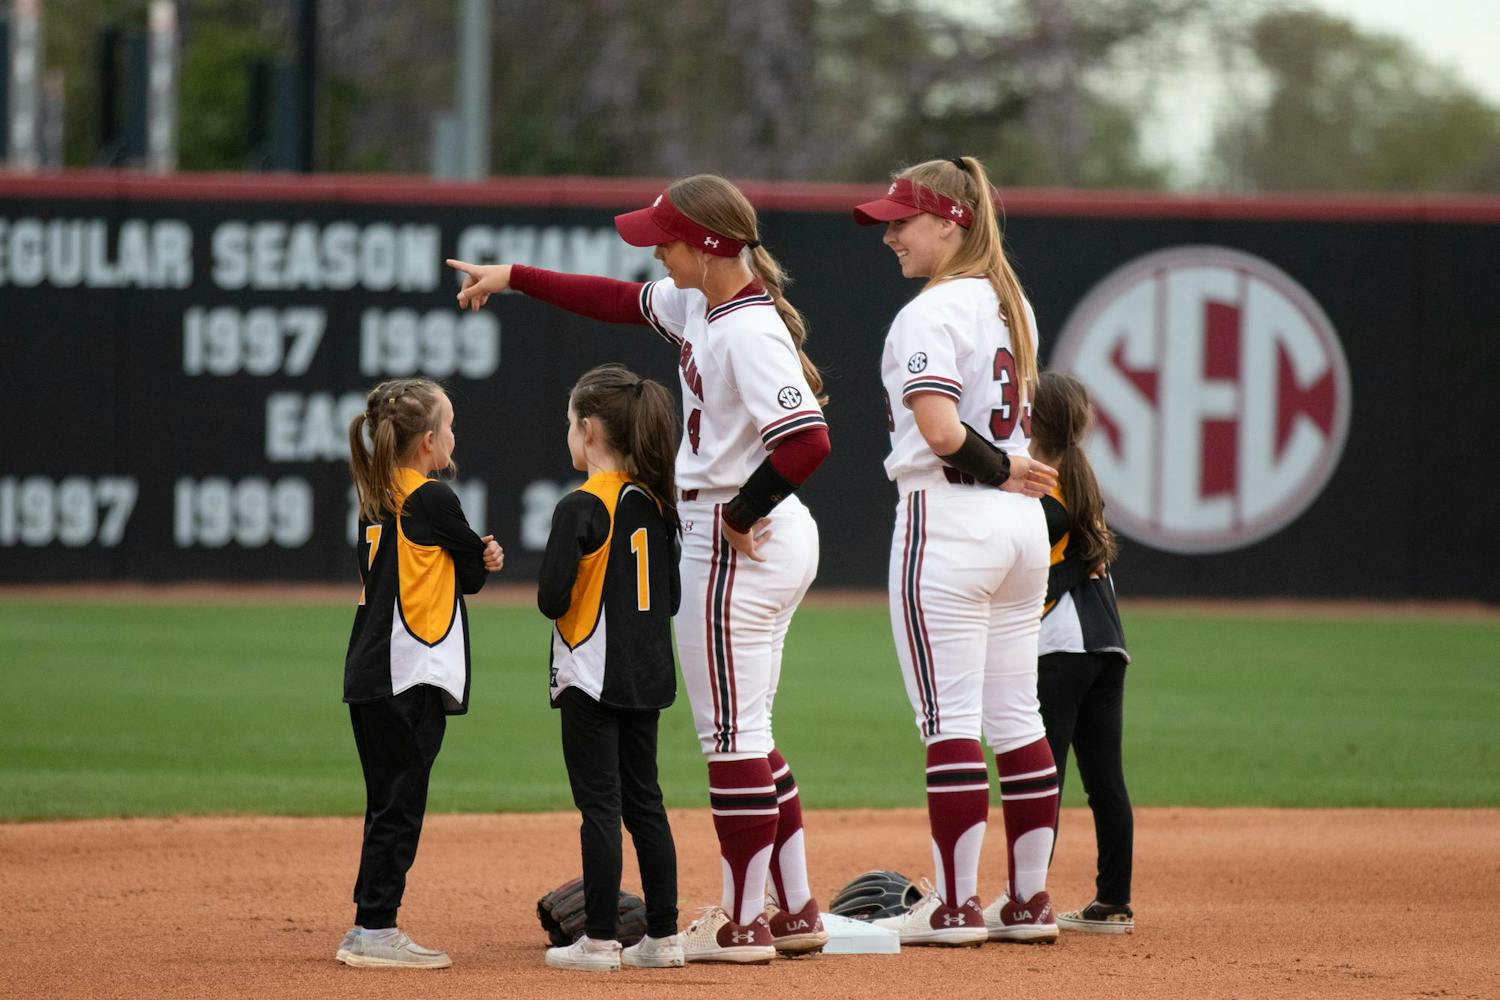 Gamecock Softball played two games against the University of Tennessee Volunteers over the weekend of March 23, 2024. The Gamecocks, ranked No. 28, lost 1-2 to the Volunteers on March 23 and 0-7 on March 24, making the team's current record 22-9. Notably, senior infielder Denver Bryant doubled with a runner on and two outs in the fourth, but it wasn't enough to push the Gamecocks forward to a win. The game series wrapped up on March 25 at the Carolina Softball Stadium at Beckham Field.